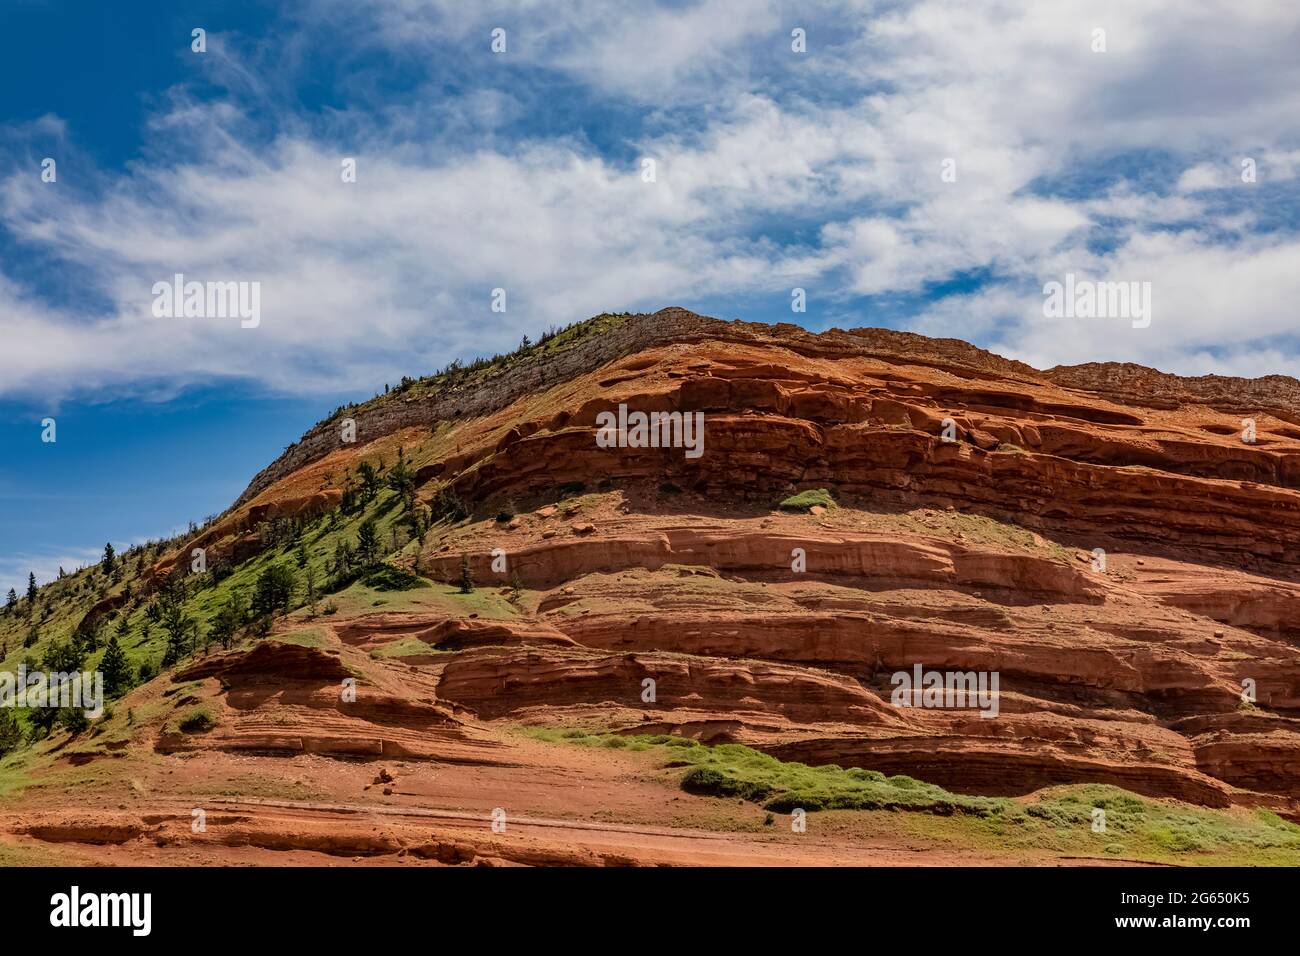 Red rocks of the Triassic Chugwater Formation in the Bighorn Basin along Chief Josepth Scenic Byway, Shoshone National Forest, Wyoming, USA Stock Photo